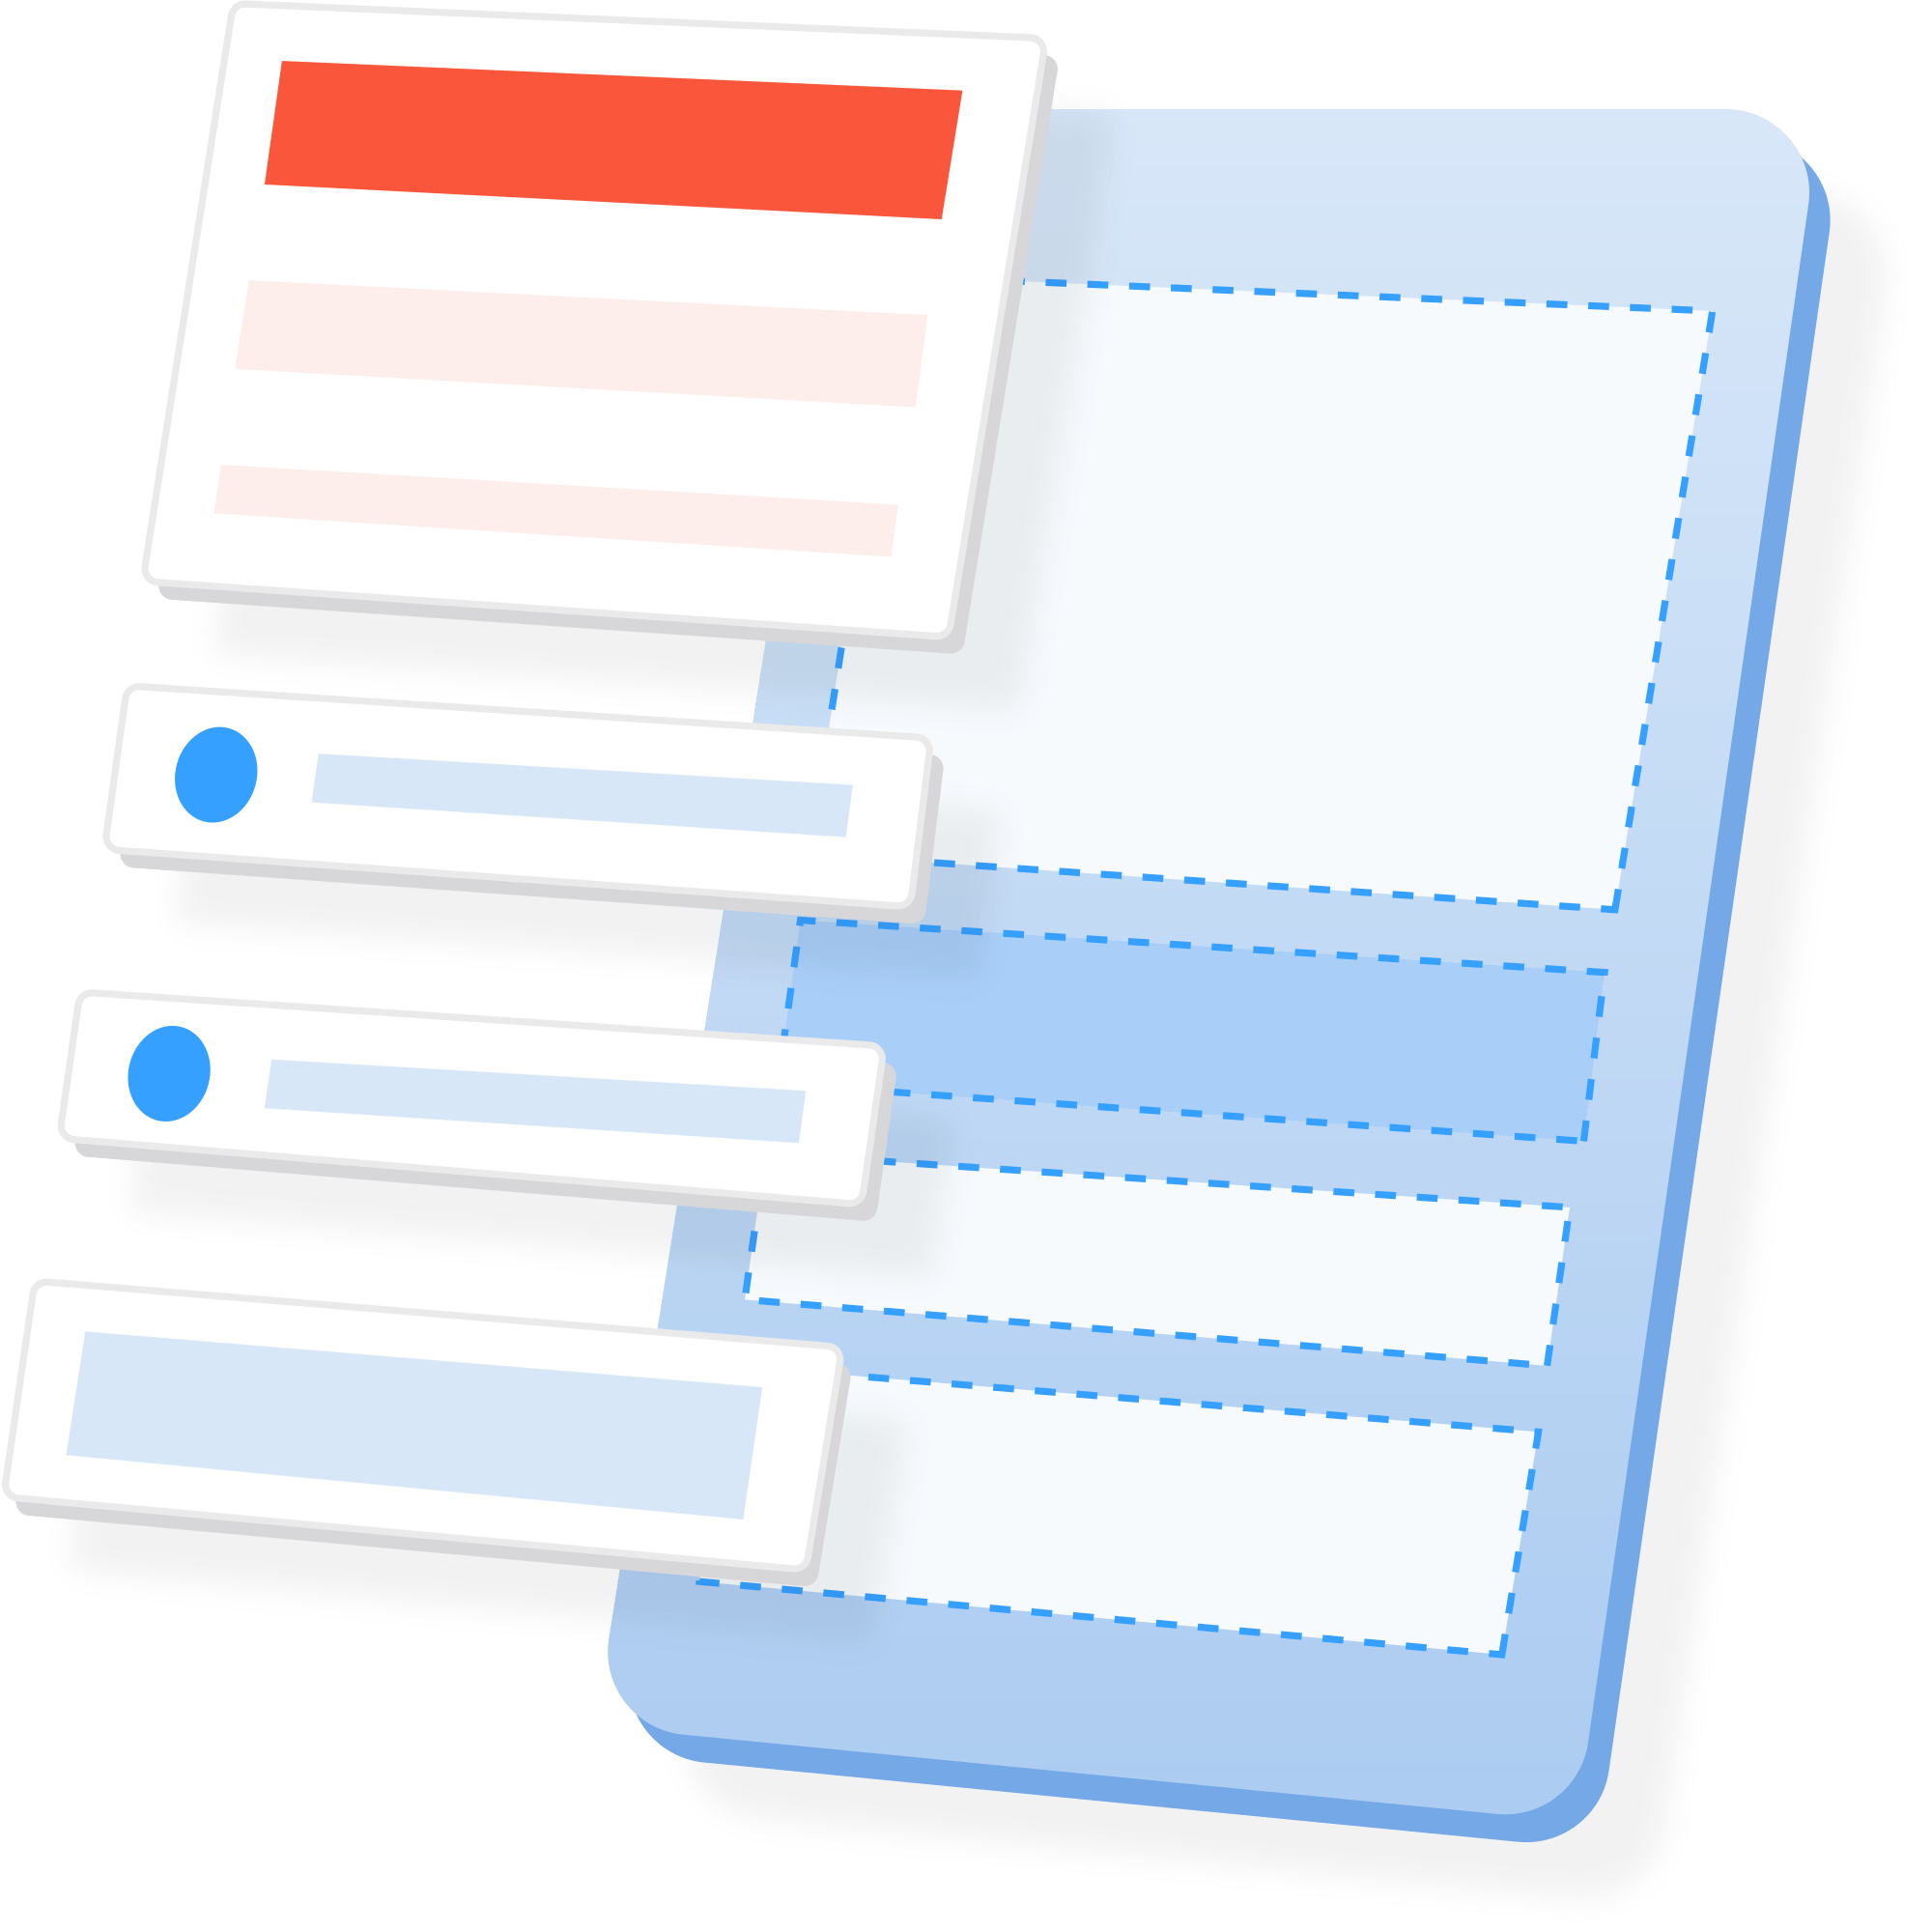 Create custom forms for your team